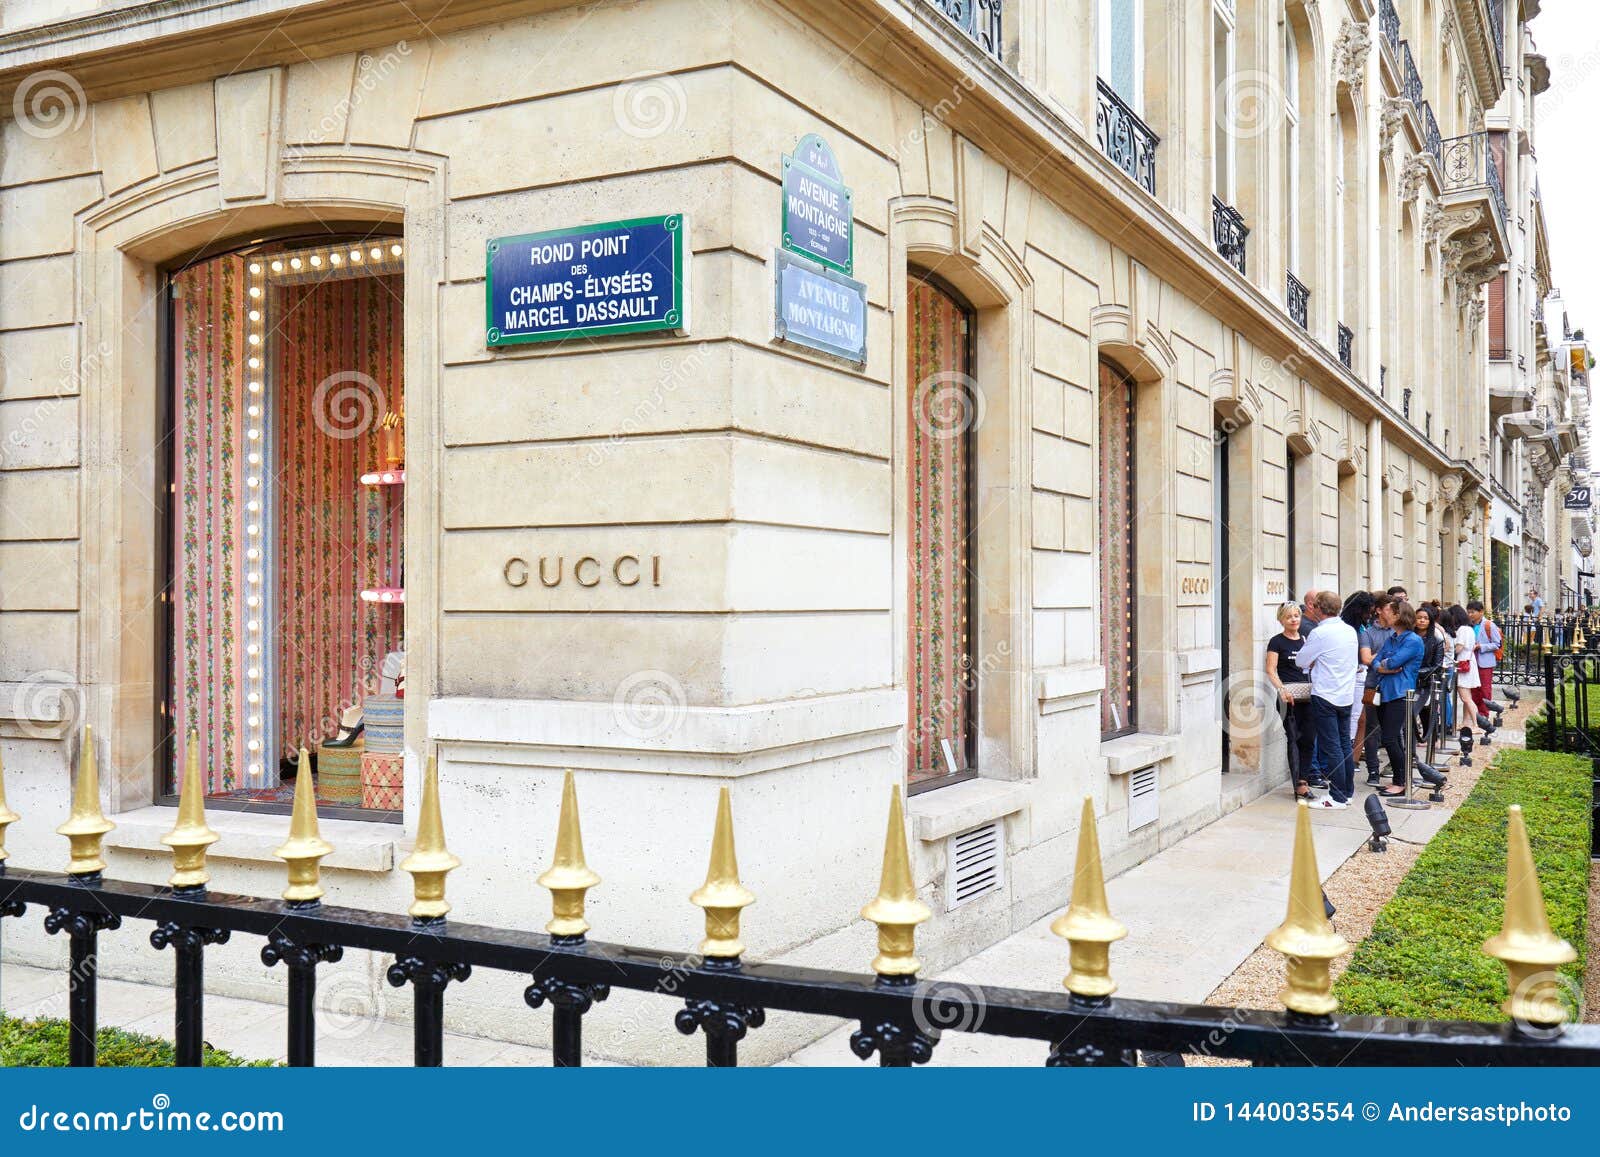 Gucci Fashion Luxury Store In Avenue Montaigne With People In Queue In Paris, France Editorial ...